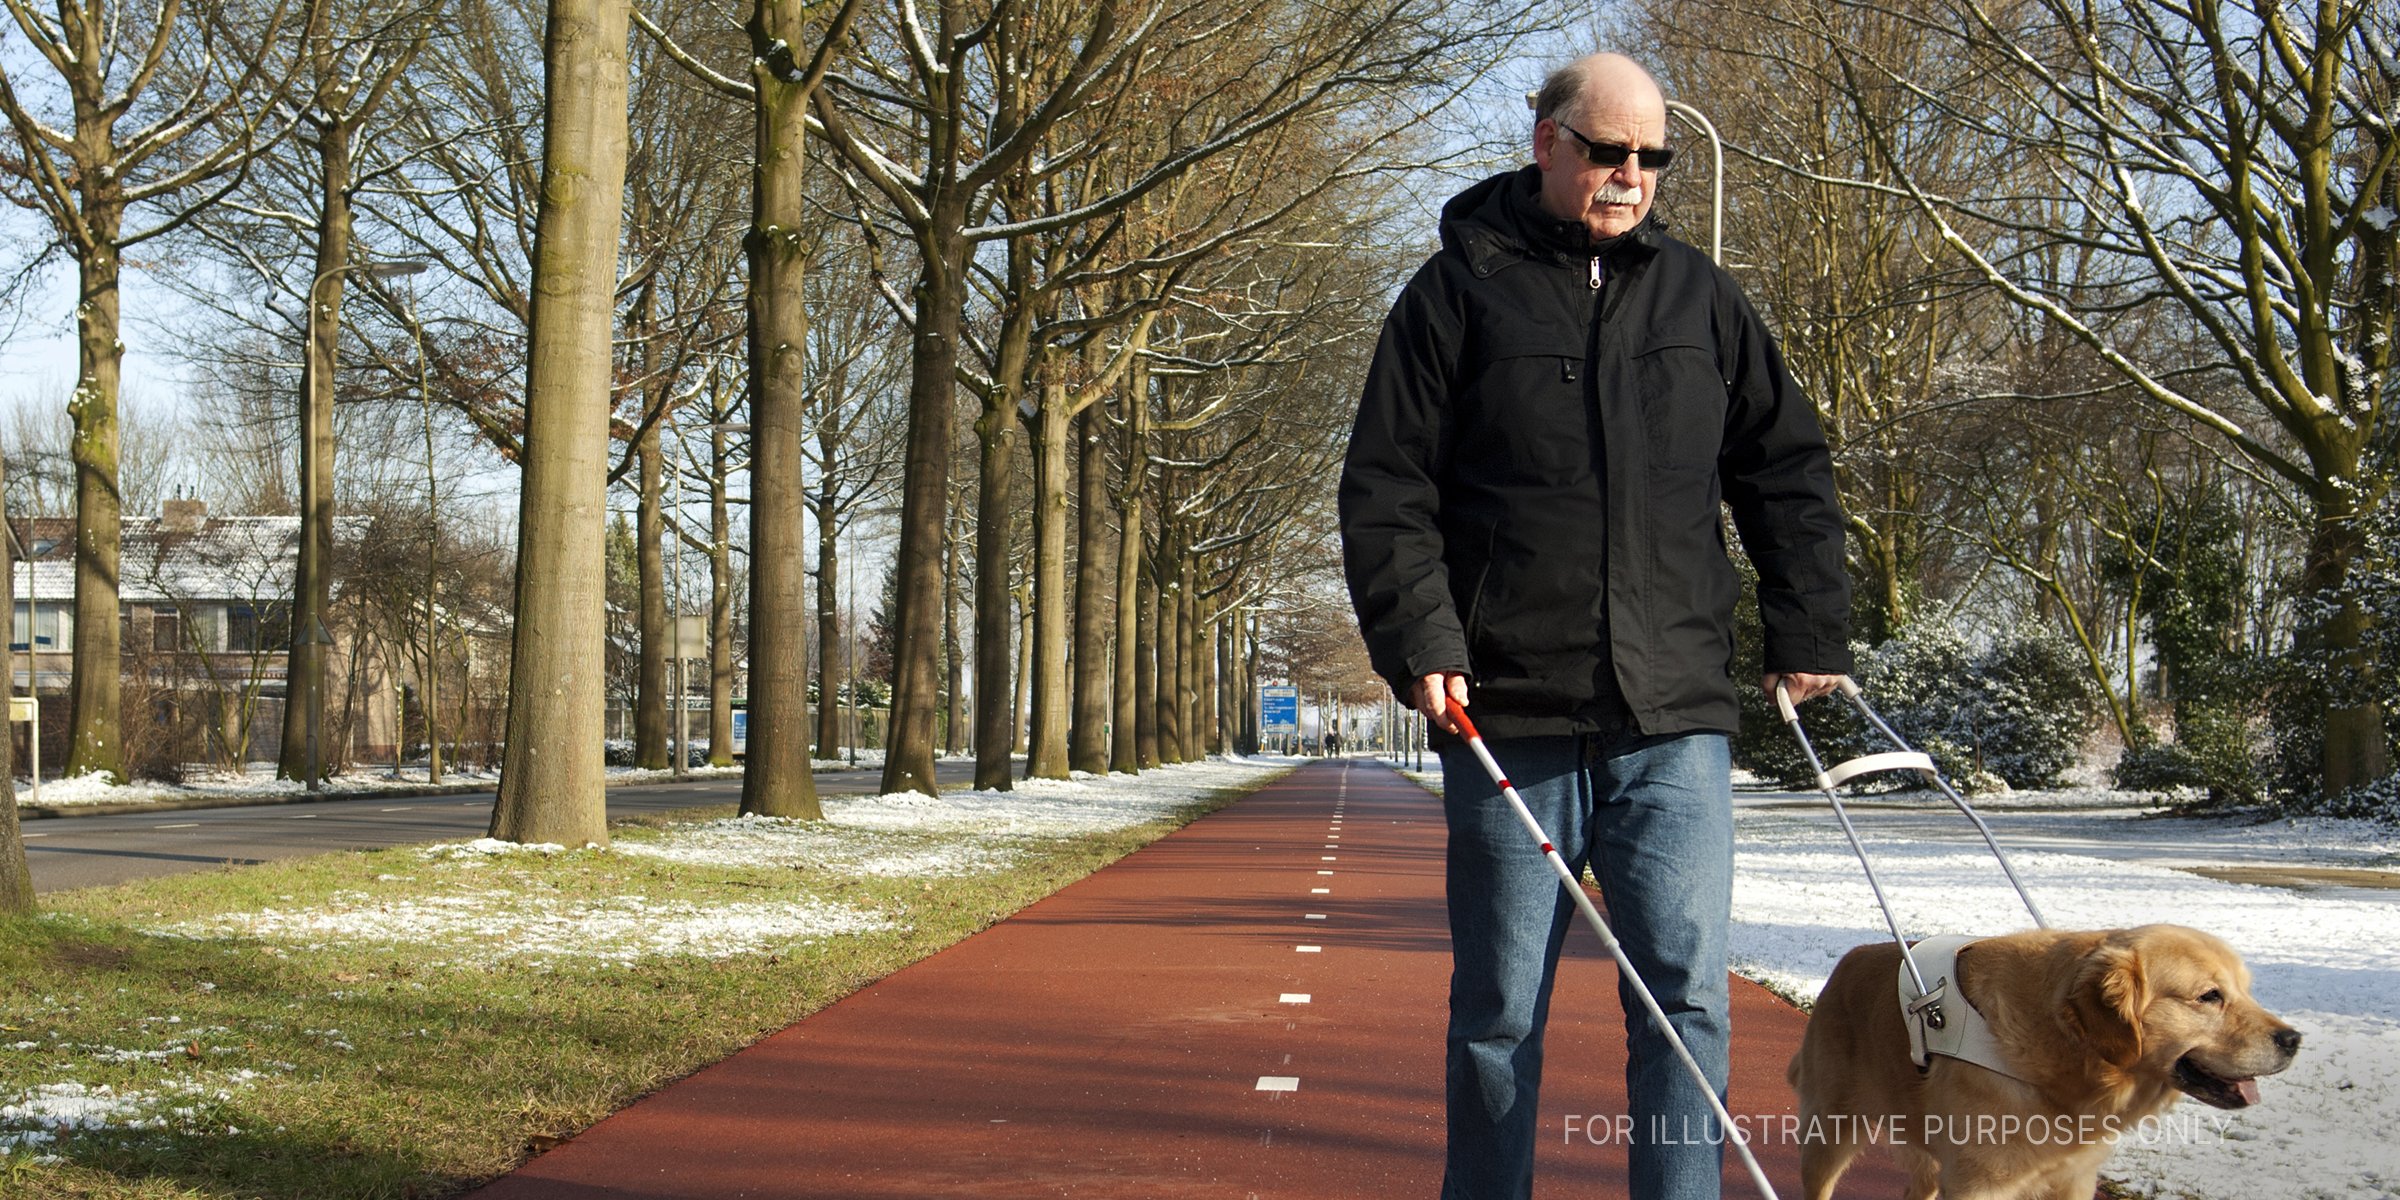 Blind man being guided by dog. | Source: Shutterstock